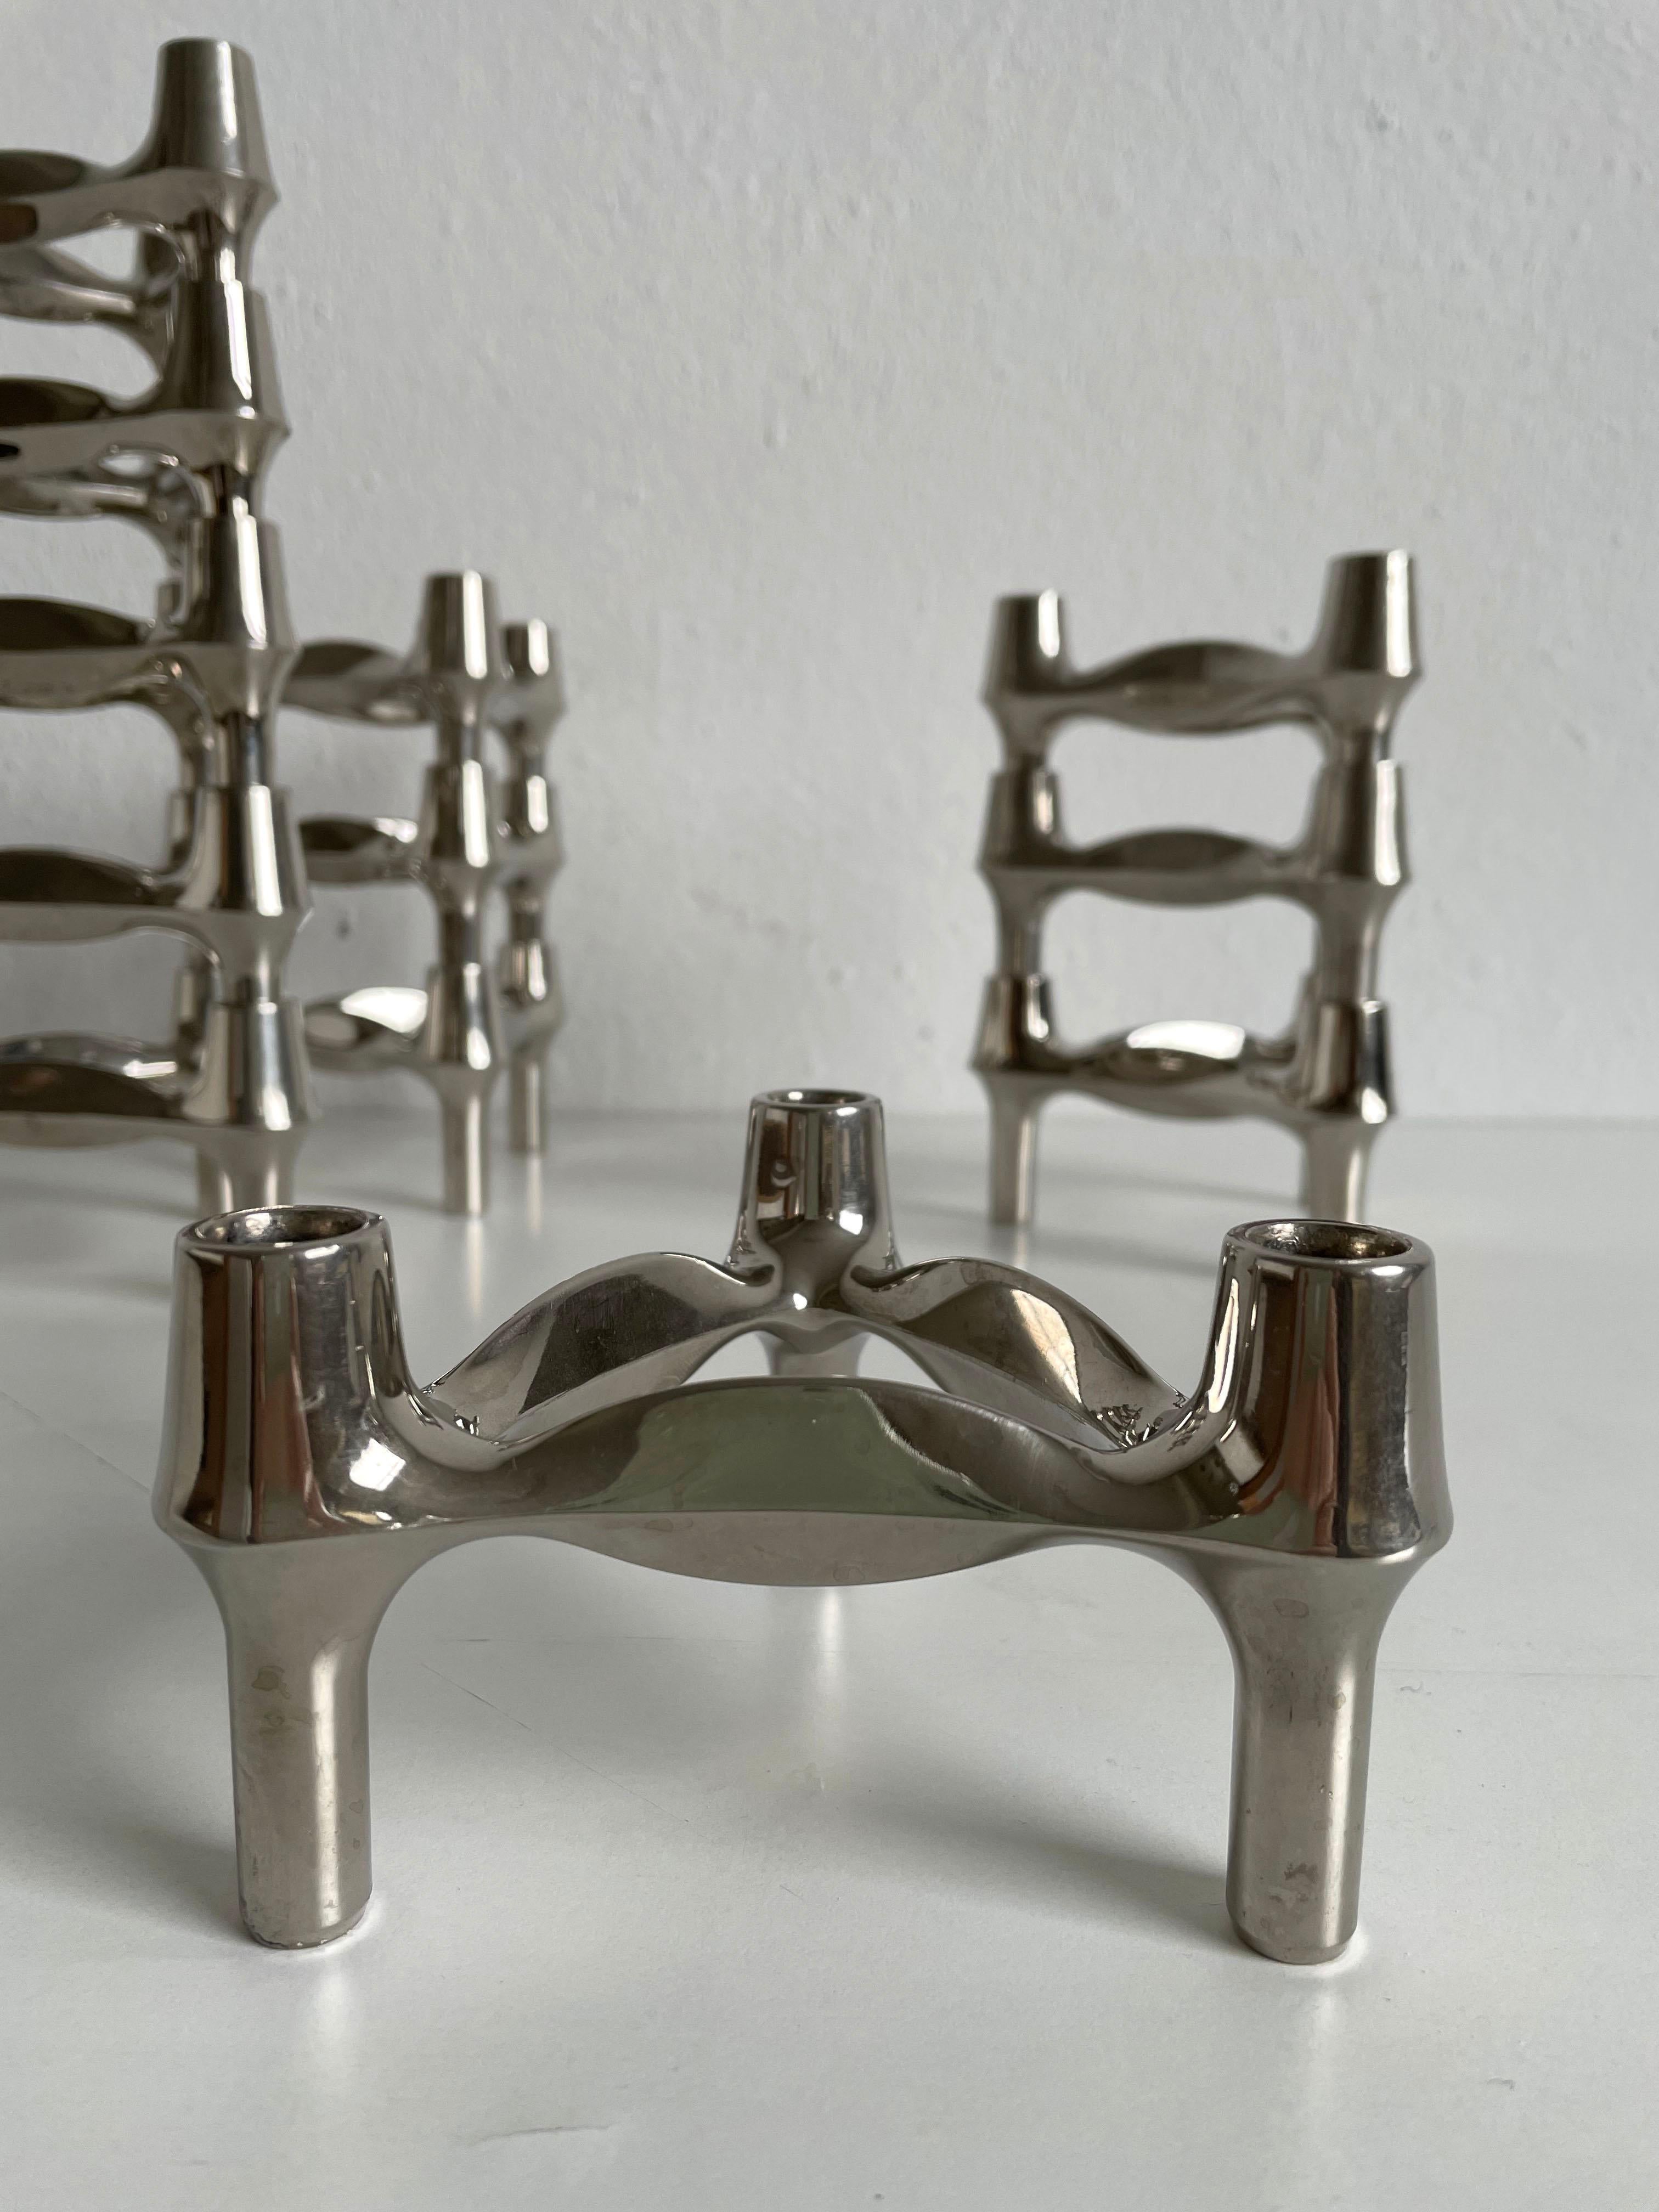 13 chrome-plated metal candleholder elements and 1 cup element, 1970s design decor, a wonderful addition to every modern home.

Iconic design classic

Producer: BMF Nagel, Germany

Design: Ceasare Stoffi, 1970s


The candlestick holders are